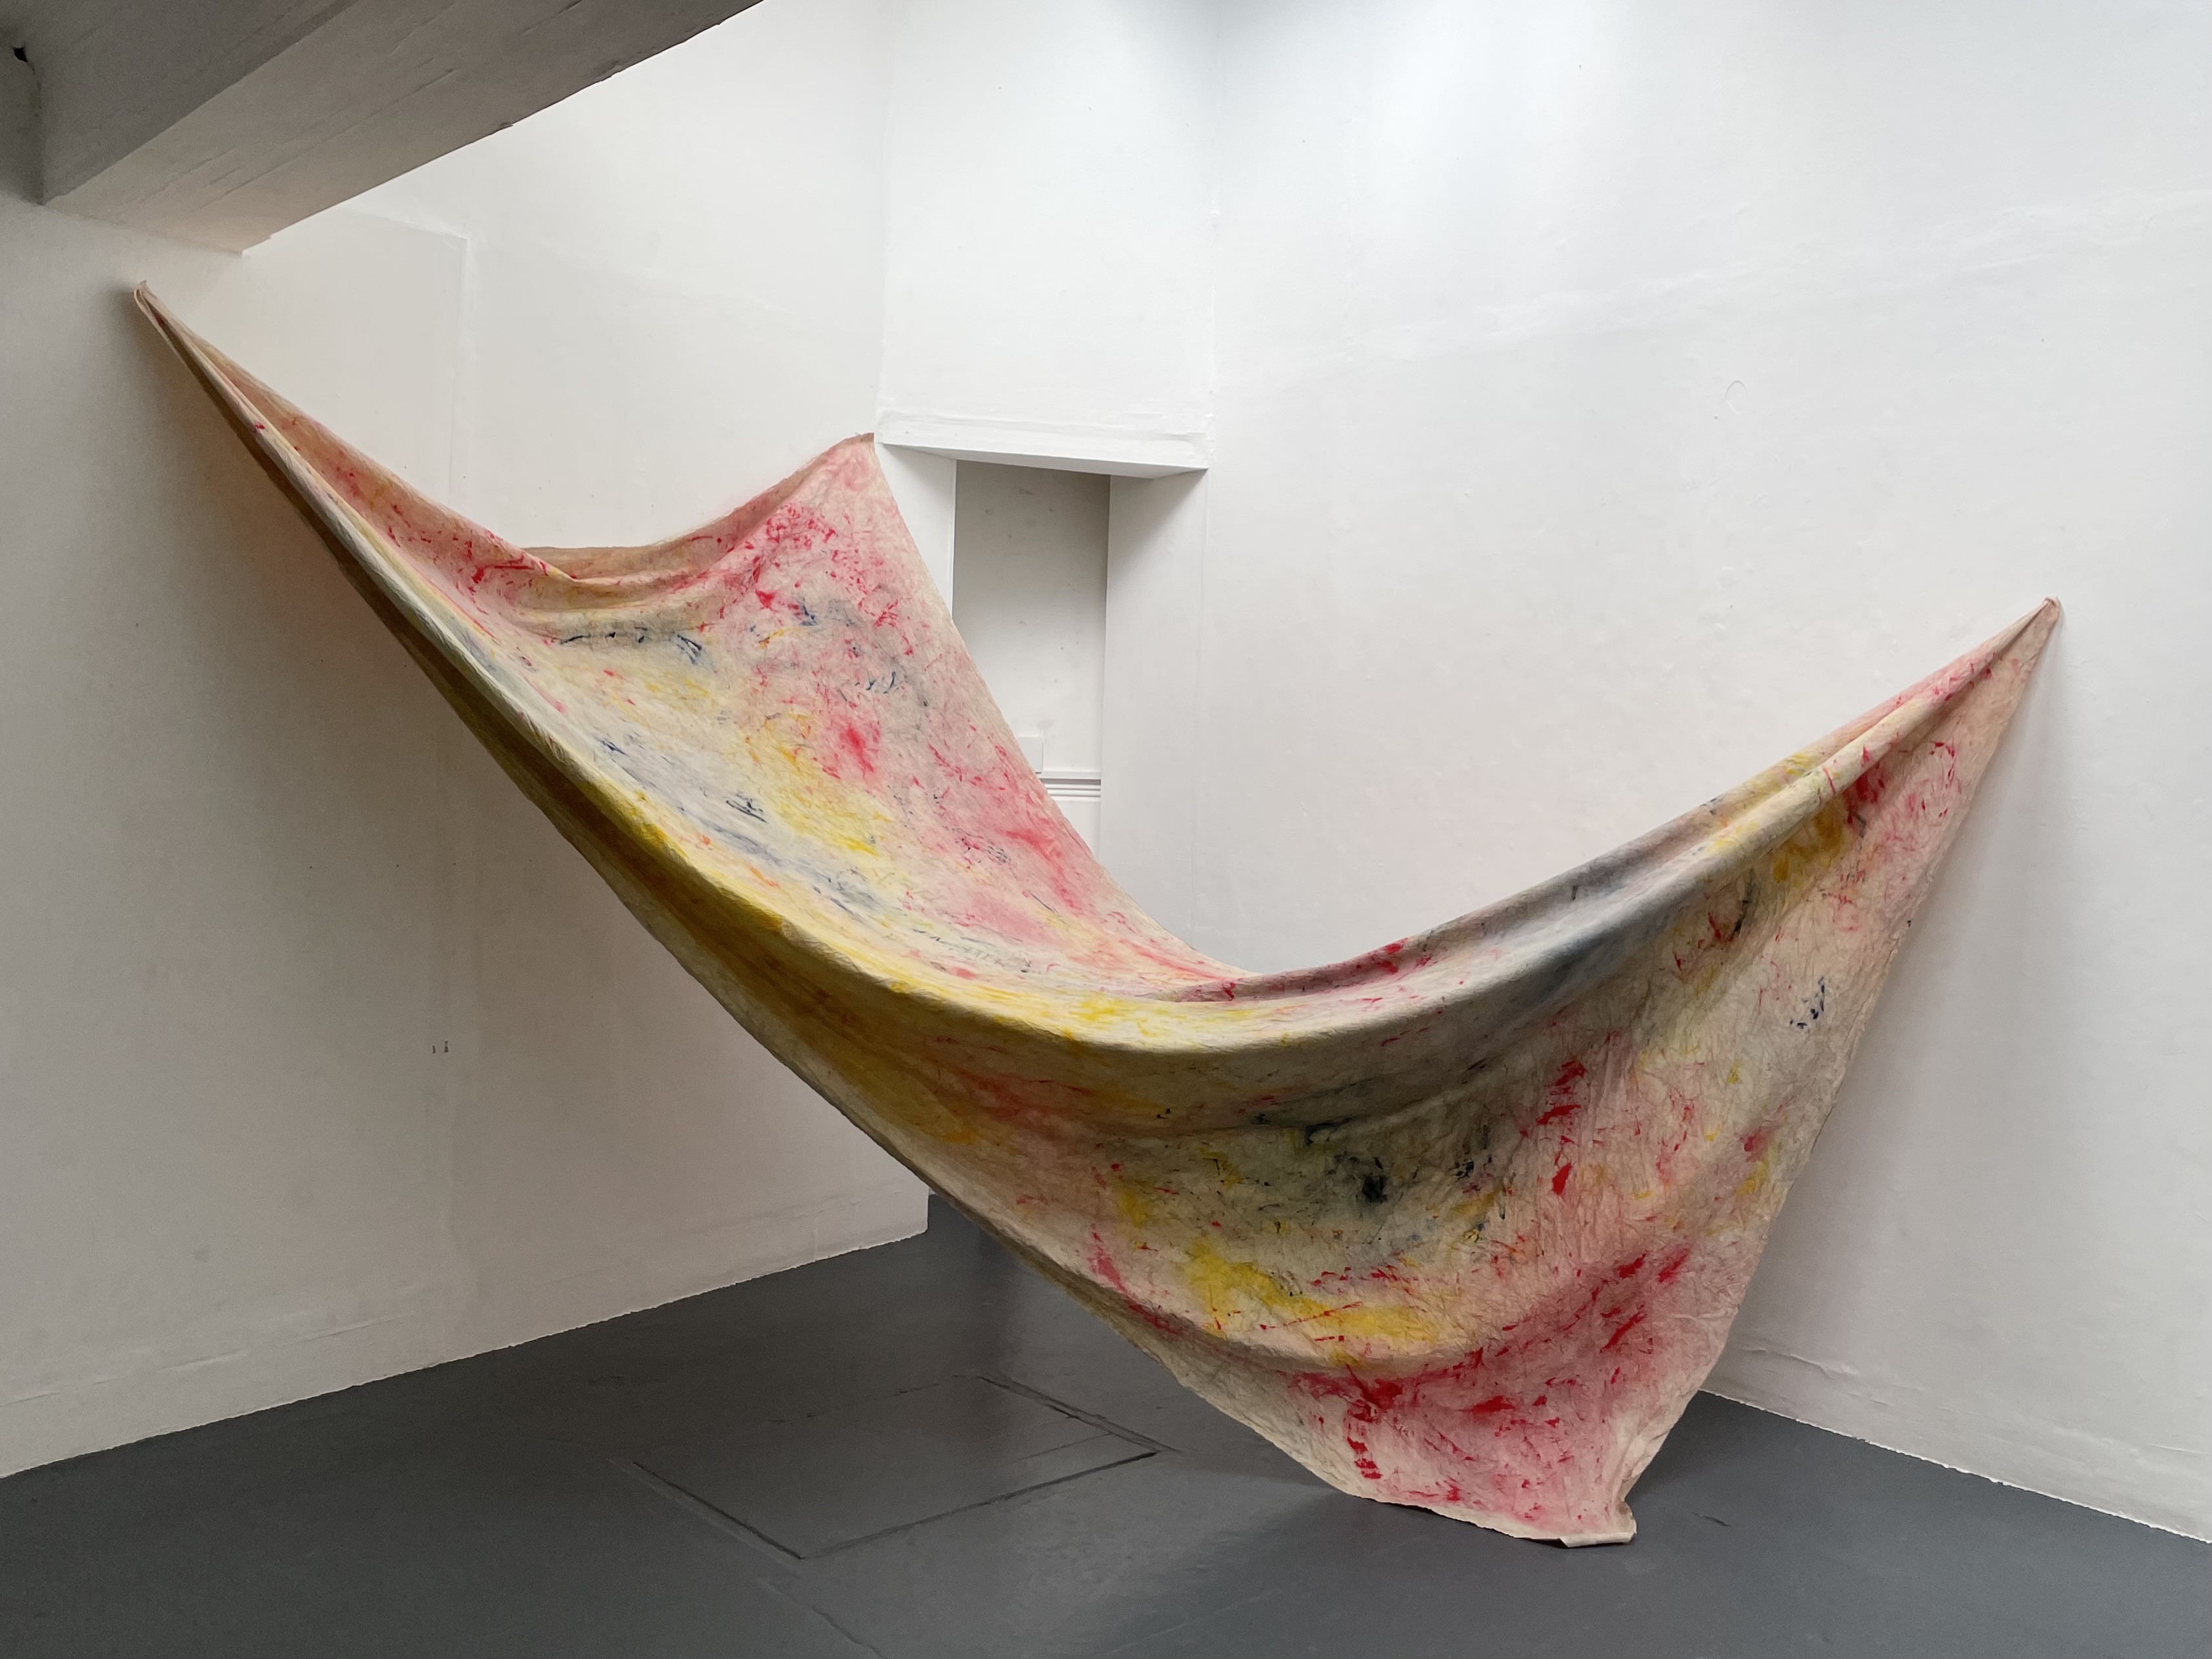 MA Fine Art work by Lauren Richeda showing a large, colourful sheet of fabric hung sculpturally.